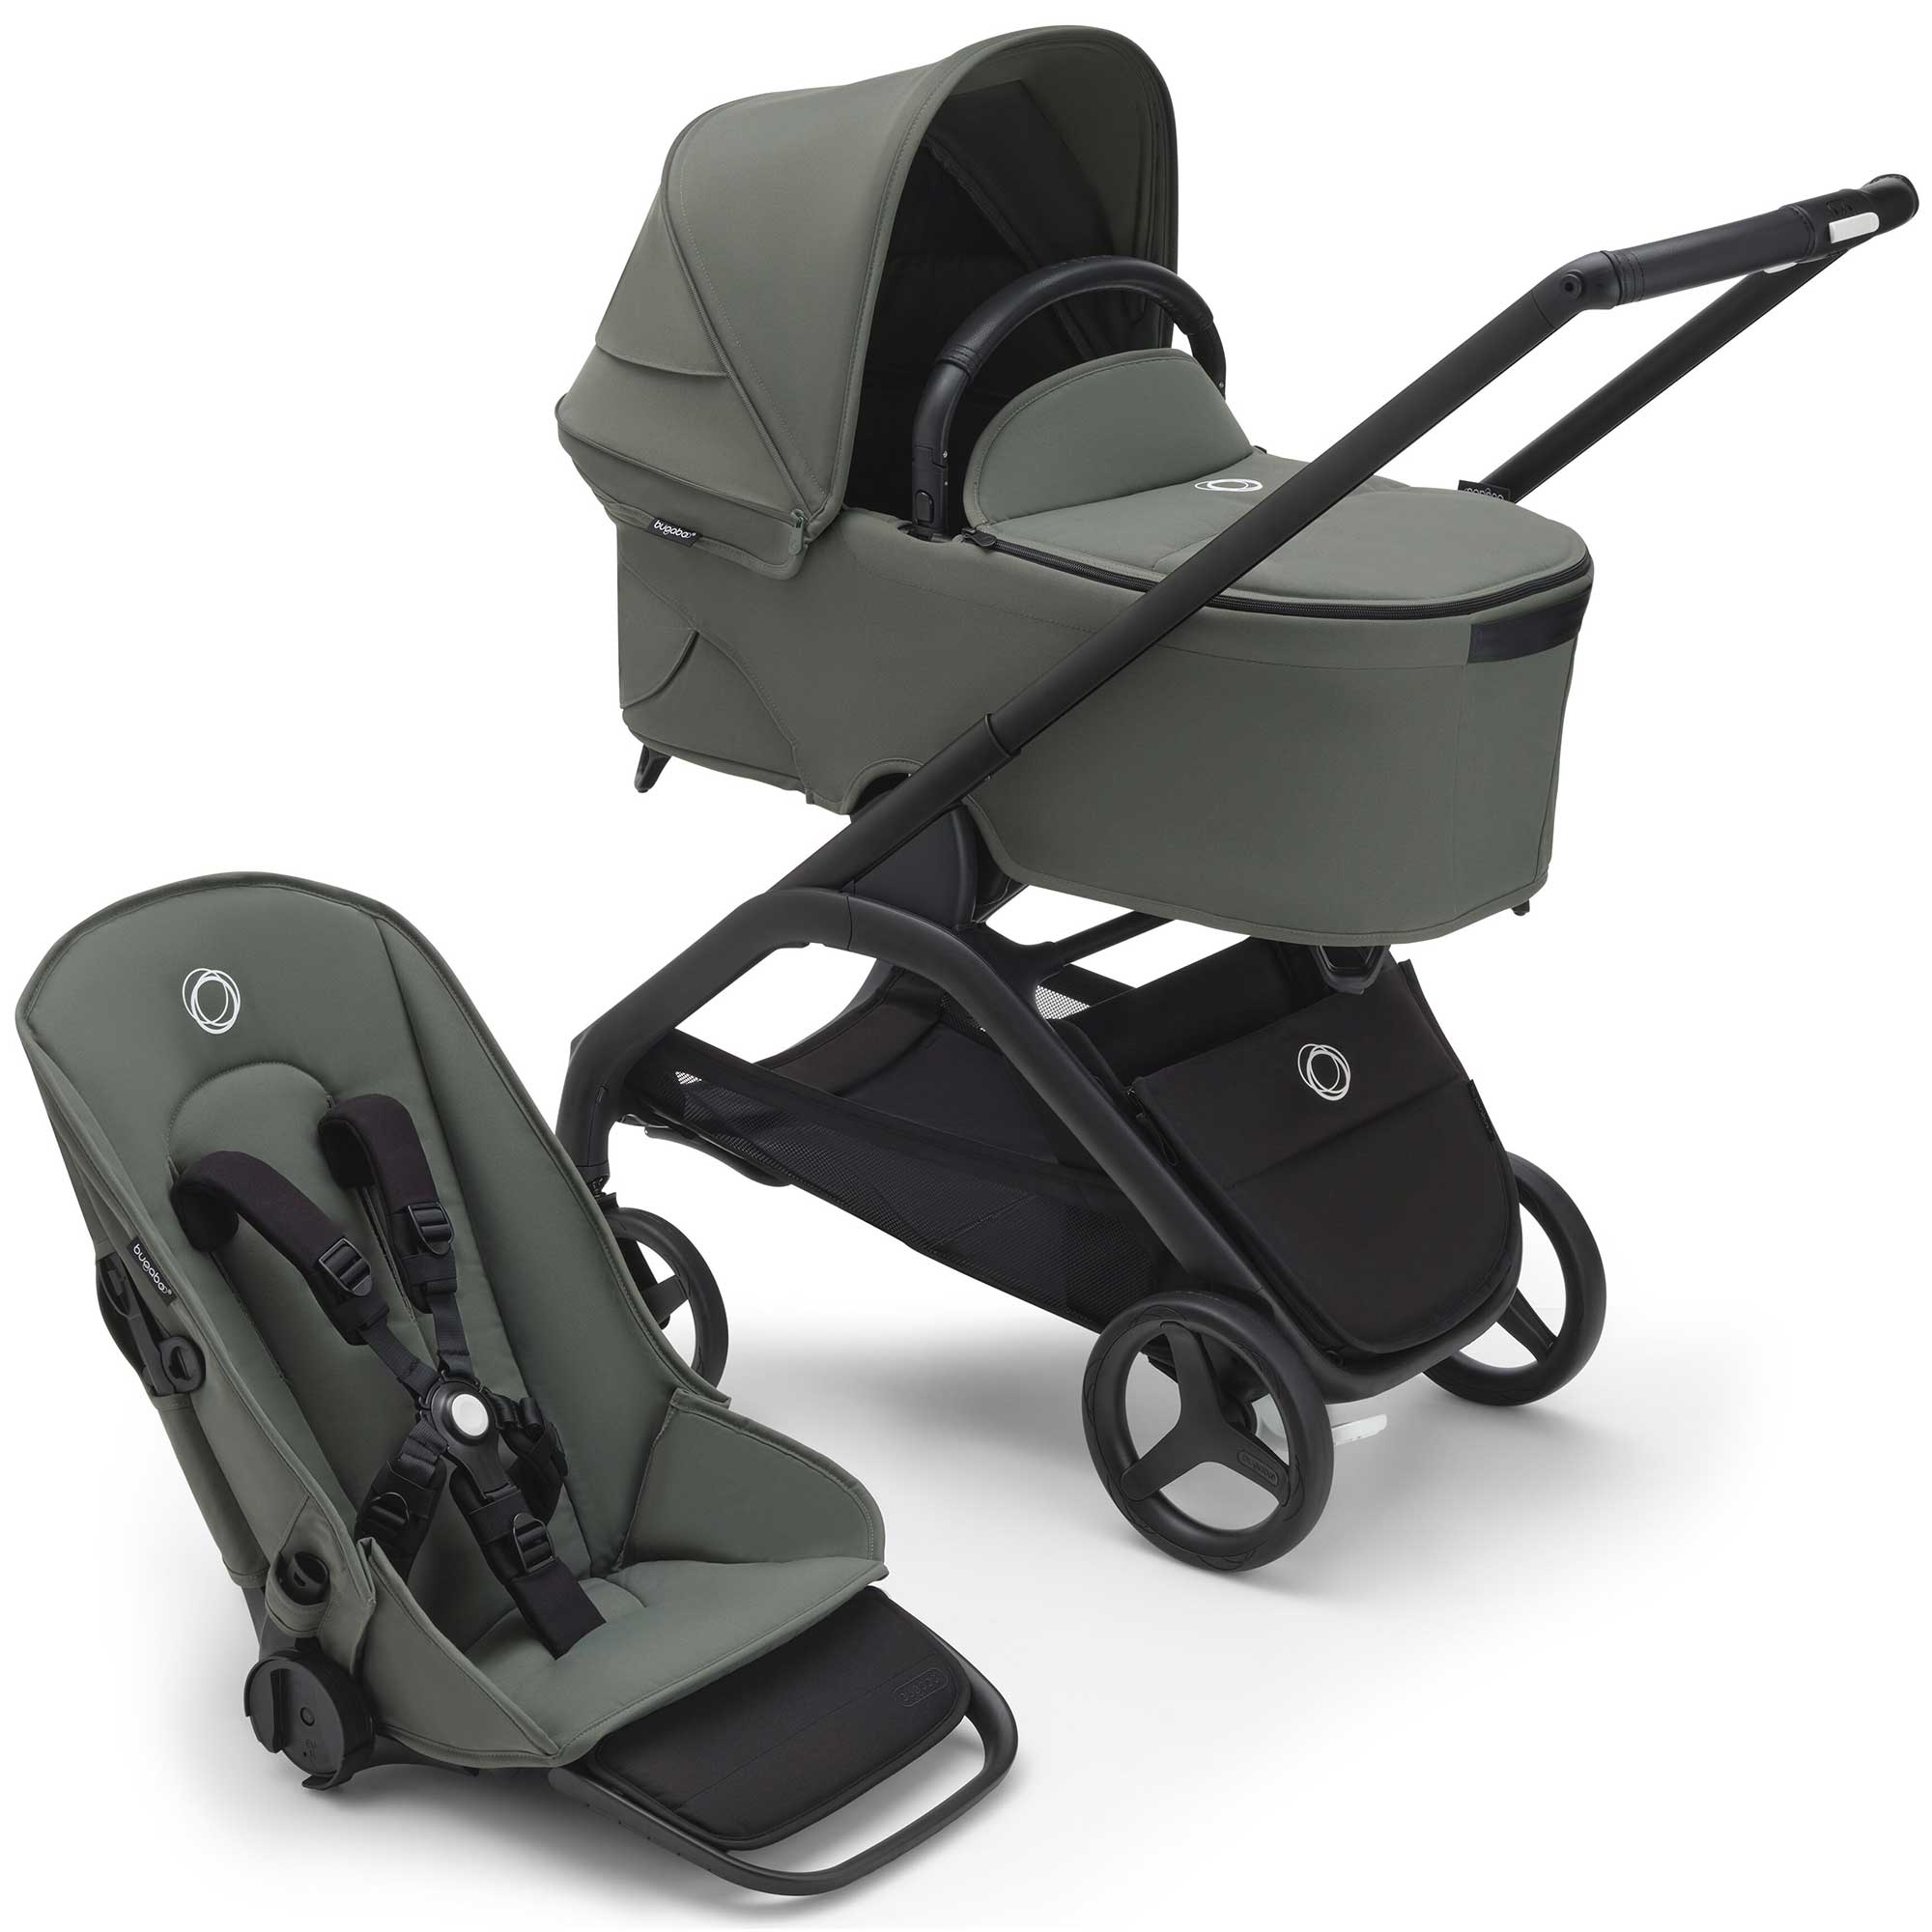 Bugaboo Dragonfly Pebble 360 Pro Travel System - Black/Forest Green Travel Systems 13818-BLK-FOR-GRN 8717447581772